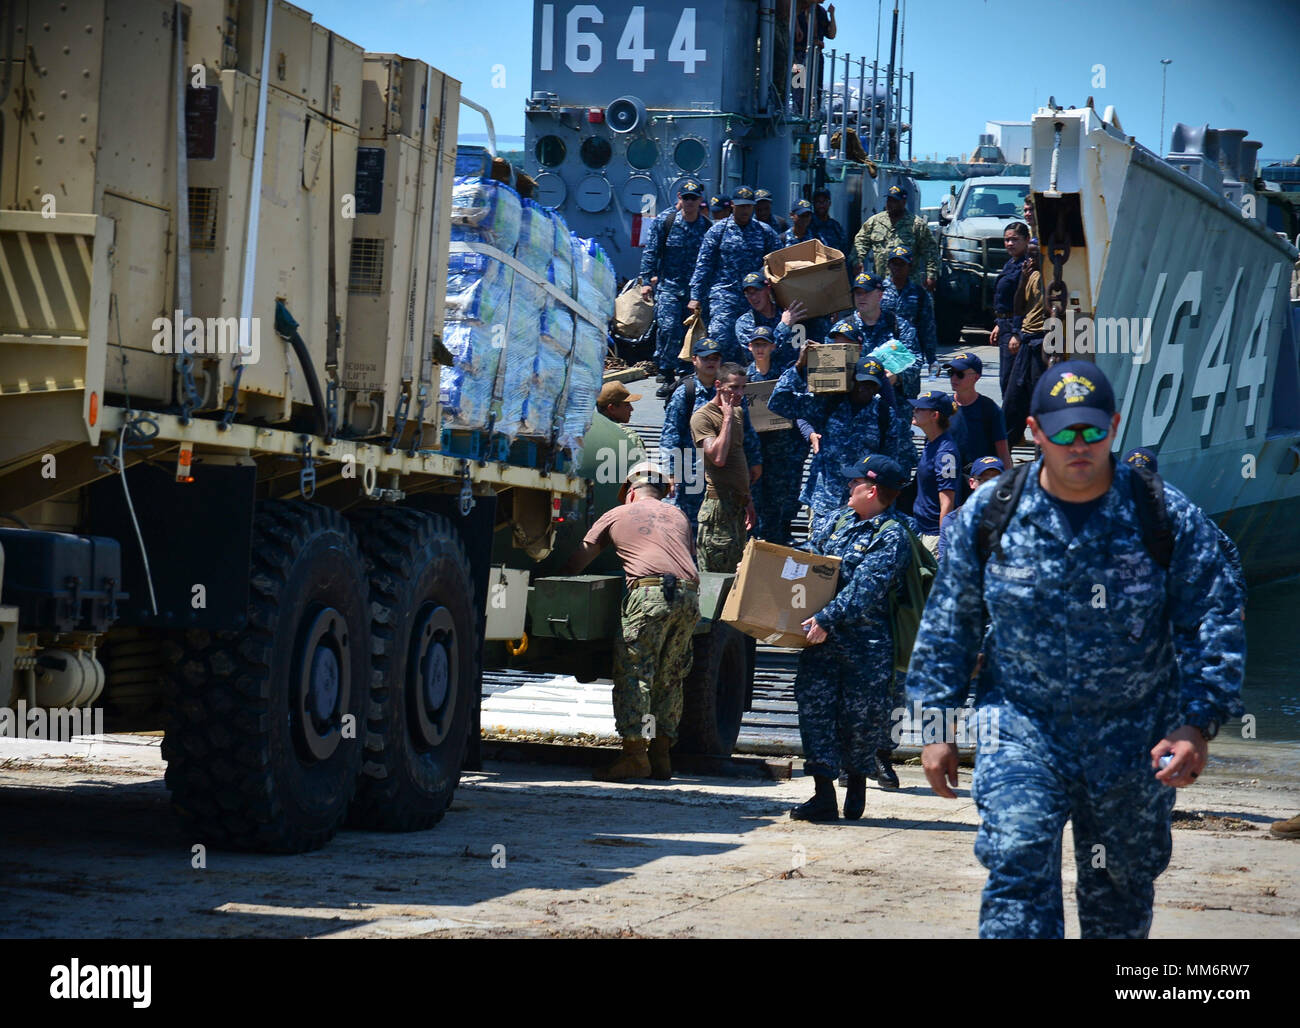 KEY WEST, Fla. (Sept. 13, 2017) Sailors attached to the amphibious assault ship USS Iwo Jima (LHD 7) exit Landing Craft Unit 1644, attached to Assault Craft Unit (ACU) 2, with supplies to assist with humanitarian relief efforts following Hurricane Irma's landfall in Key West, Florida.  The Department of Defense is supporting Federal Emergency Management Agency, the lead federal agency, in helping those affected by Hurricane Irma to minimize suffering and as one component of the overall whole-of-government response effort. (U.S. Navy photo by Mass Communication Specialist 3rd Class Daniel C. Co Stock Photo